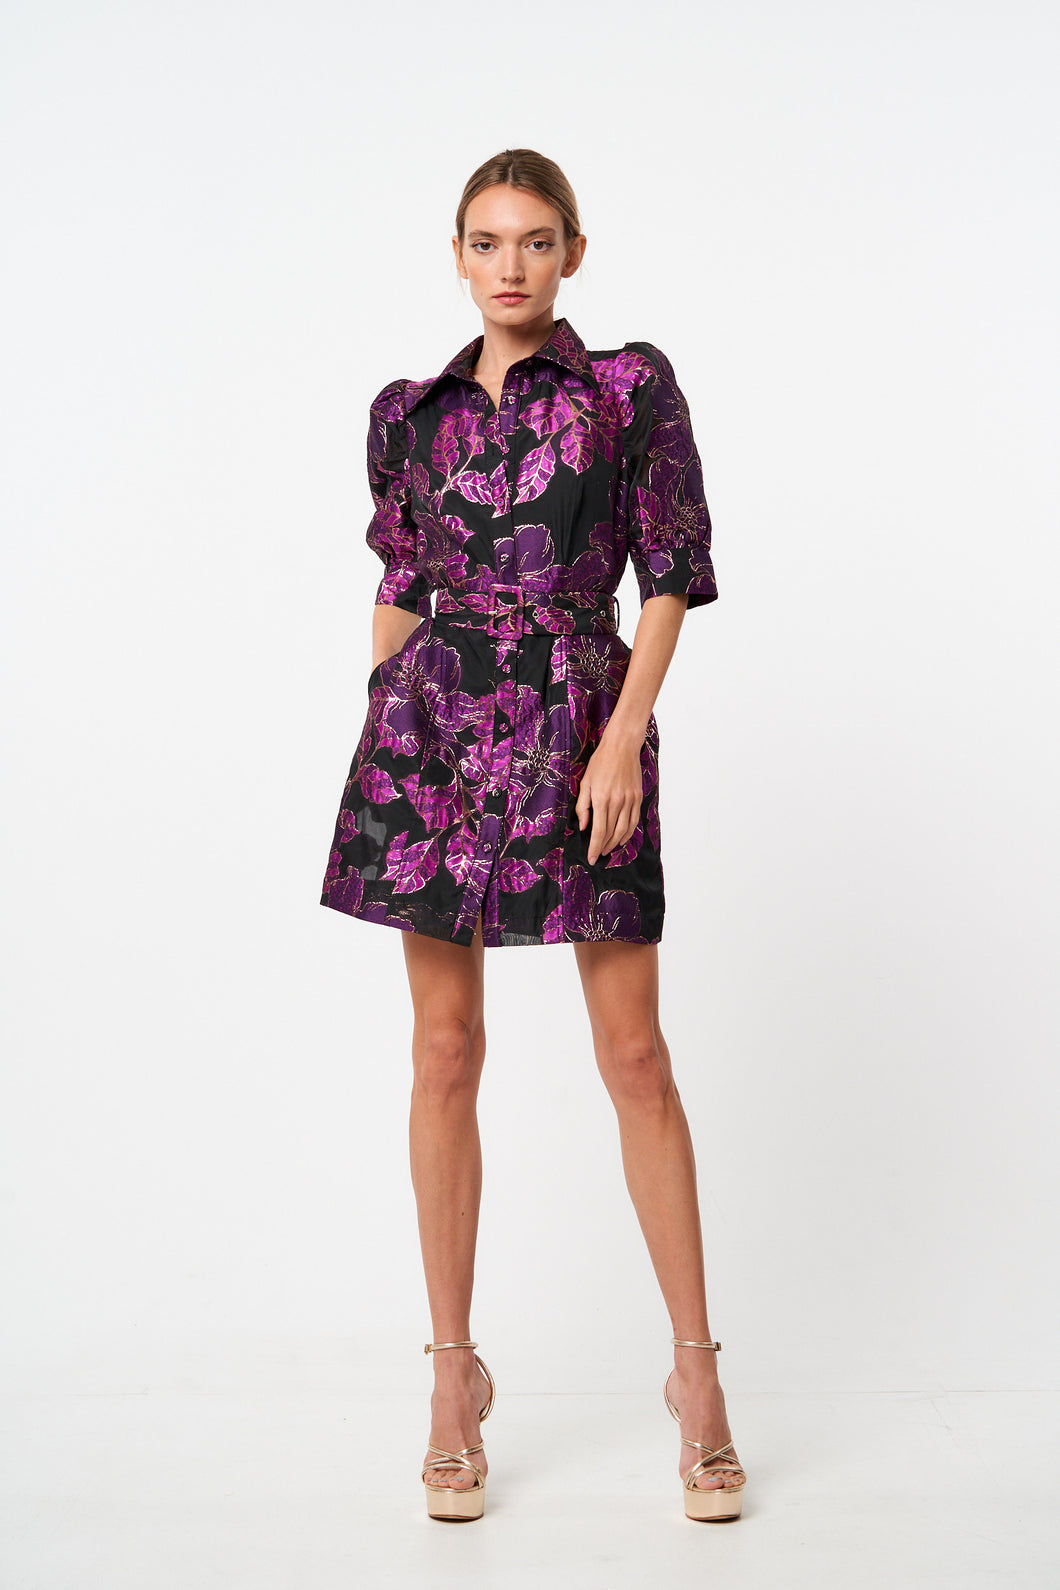 Black and Purple Print Collared Button Front Dress